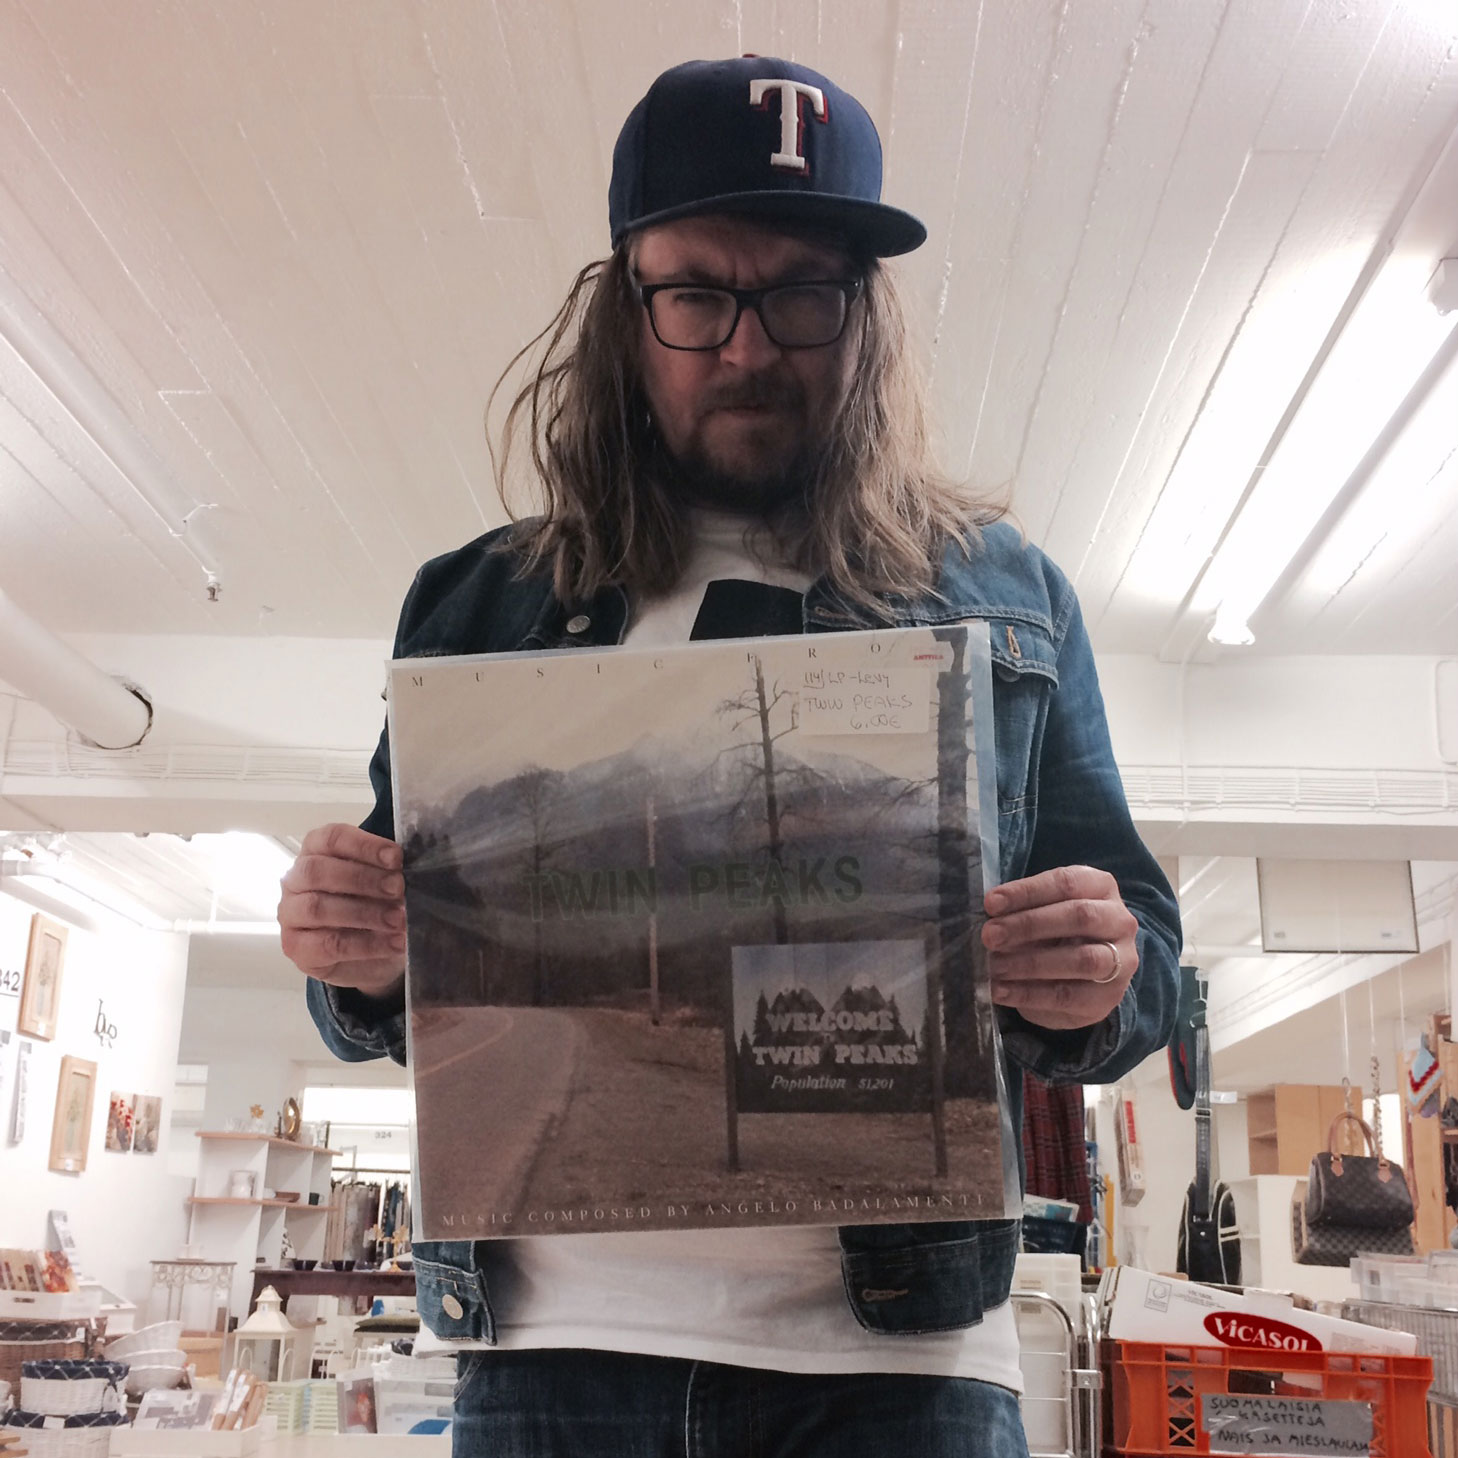 The author holding a copy of the Twin Peaks soundtrack.